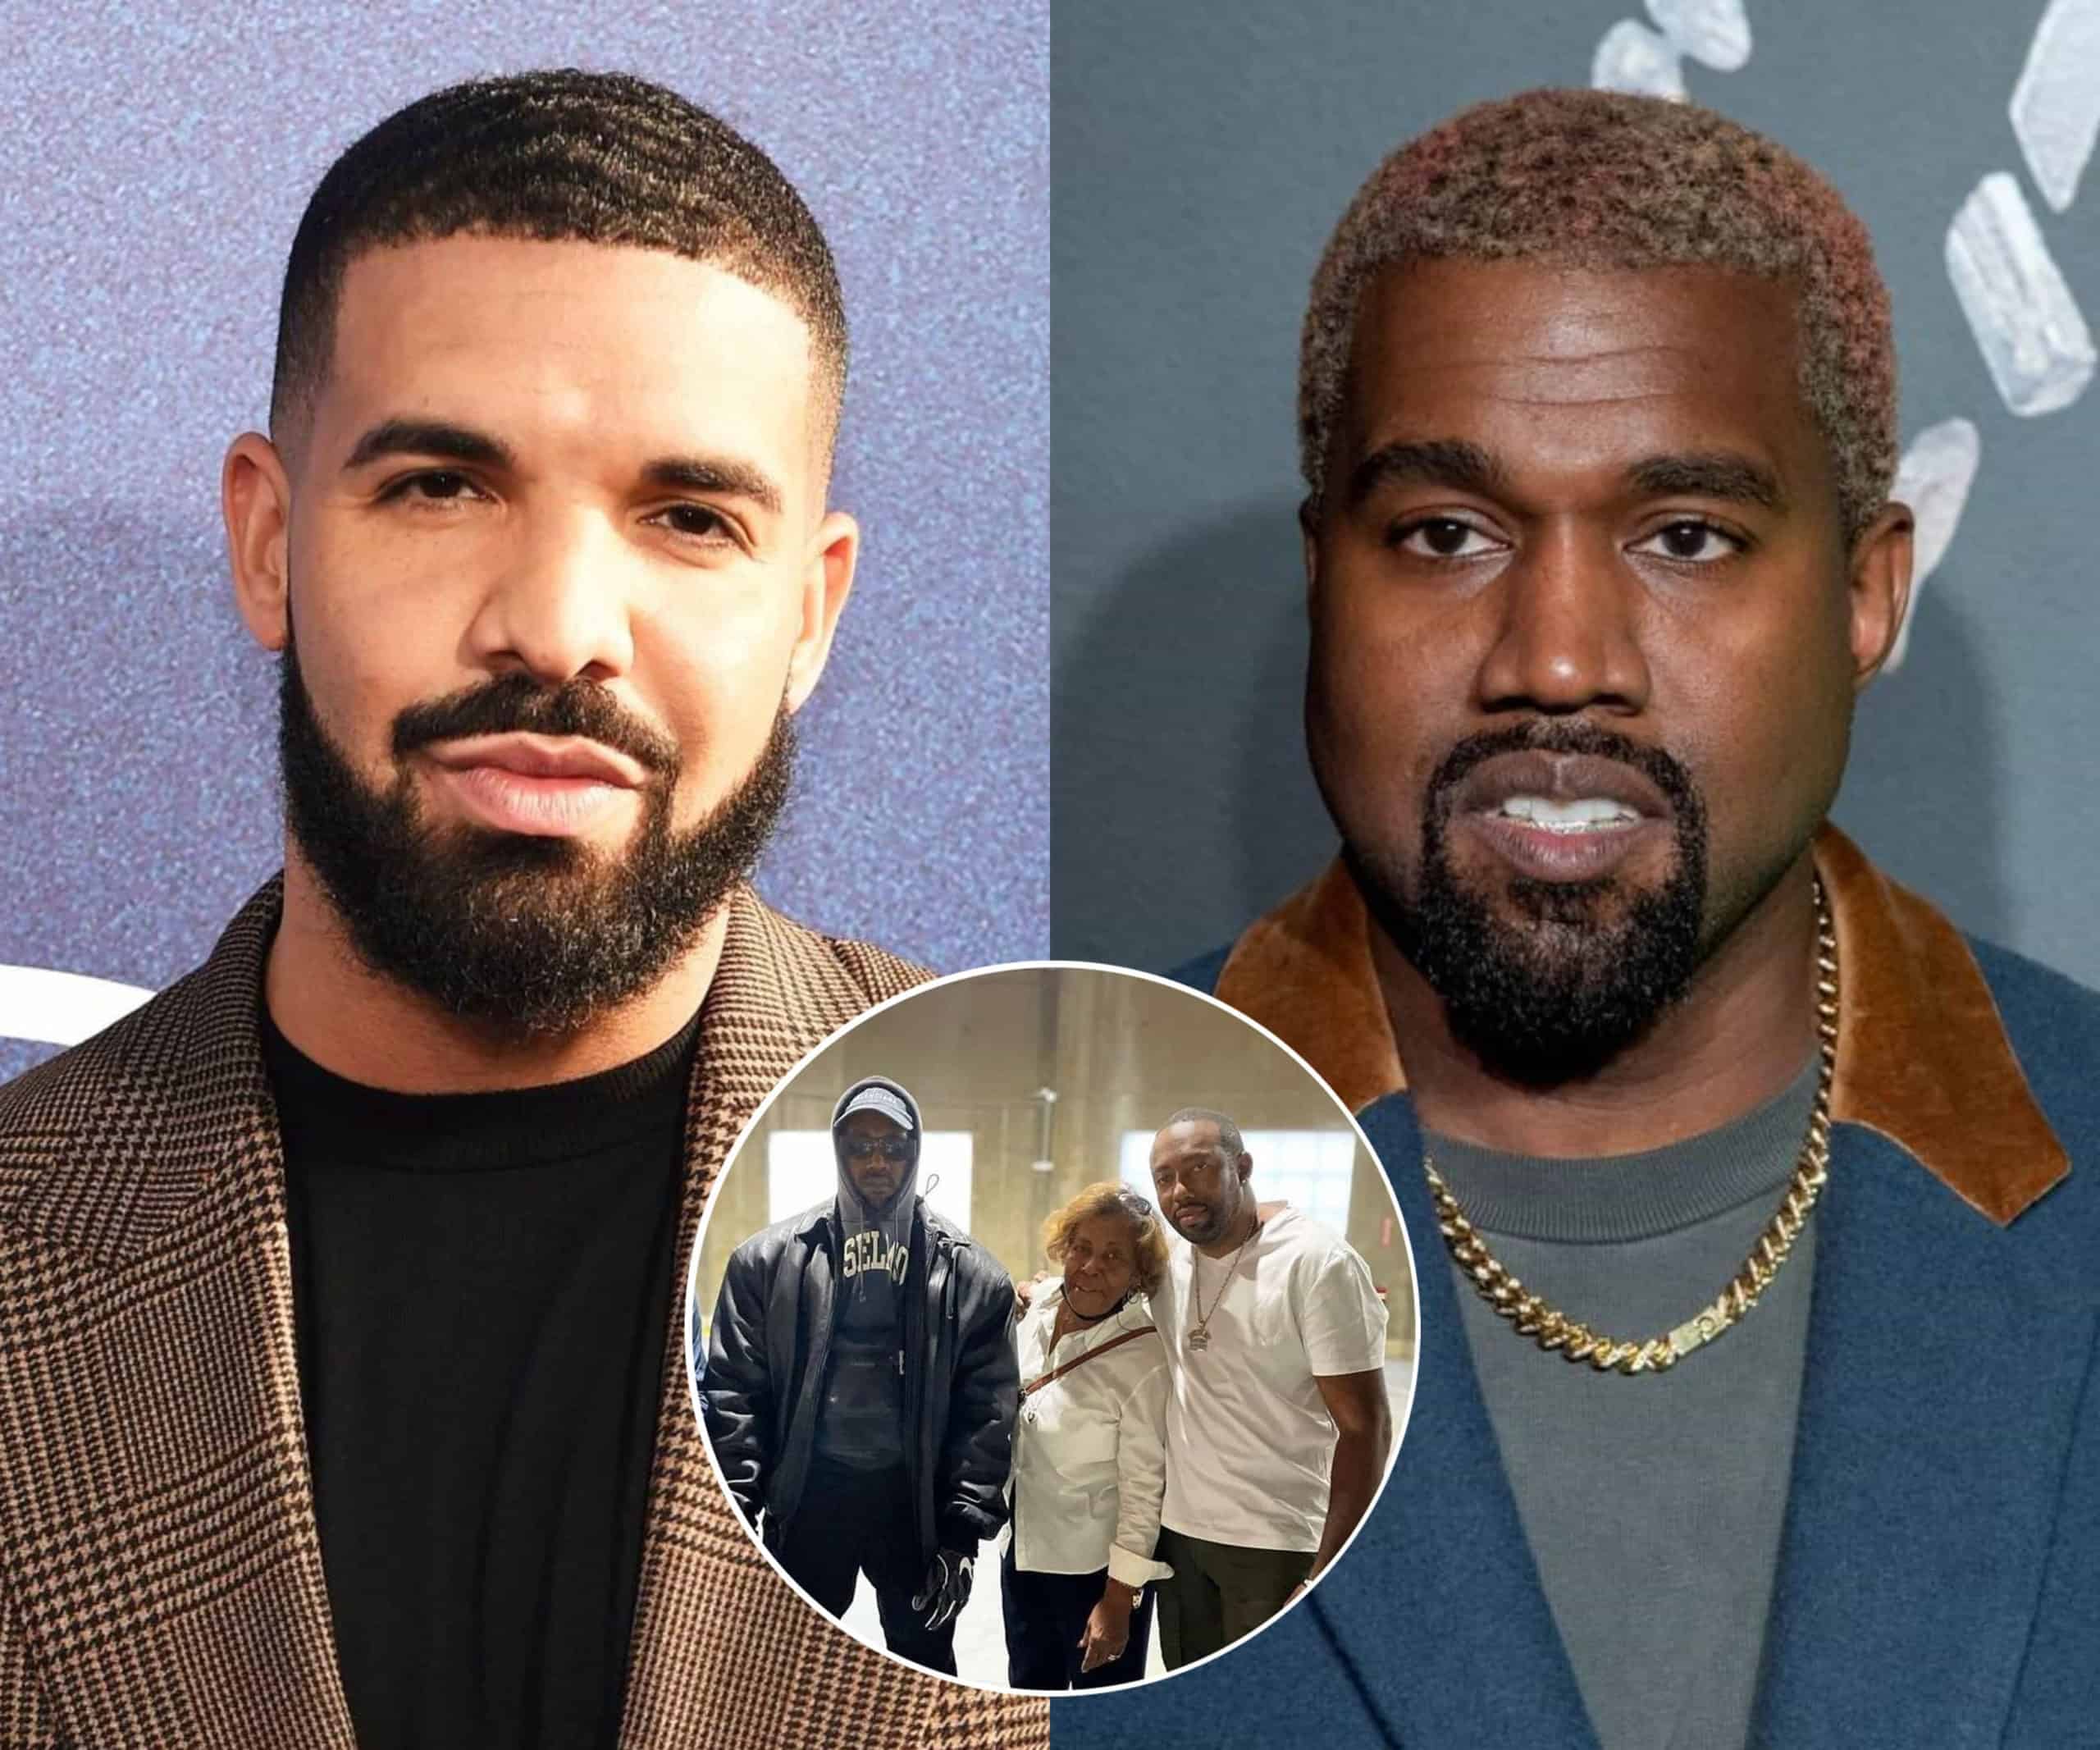 Larry Hoover Jr. Requests Drake To End Feud With Kanye West